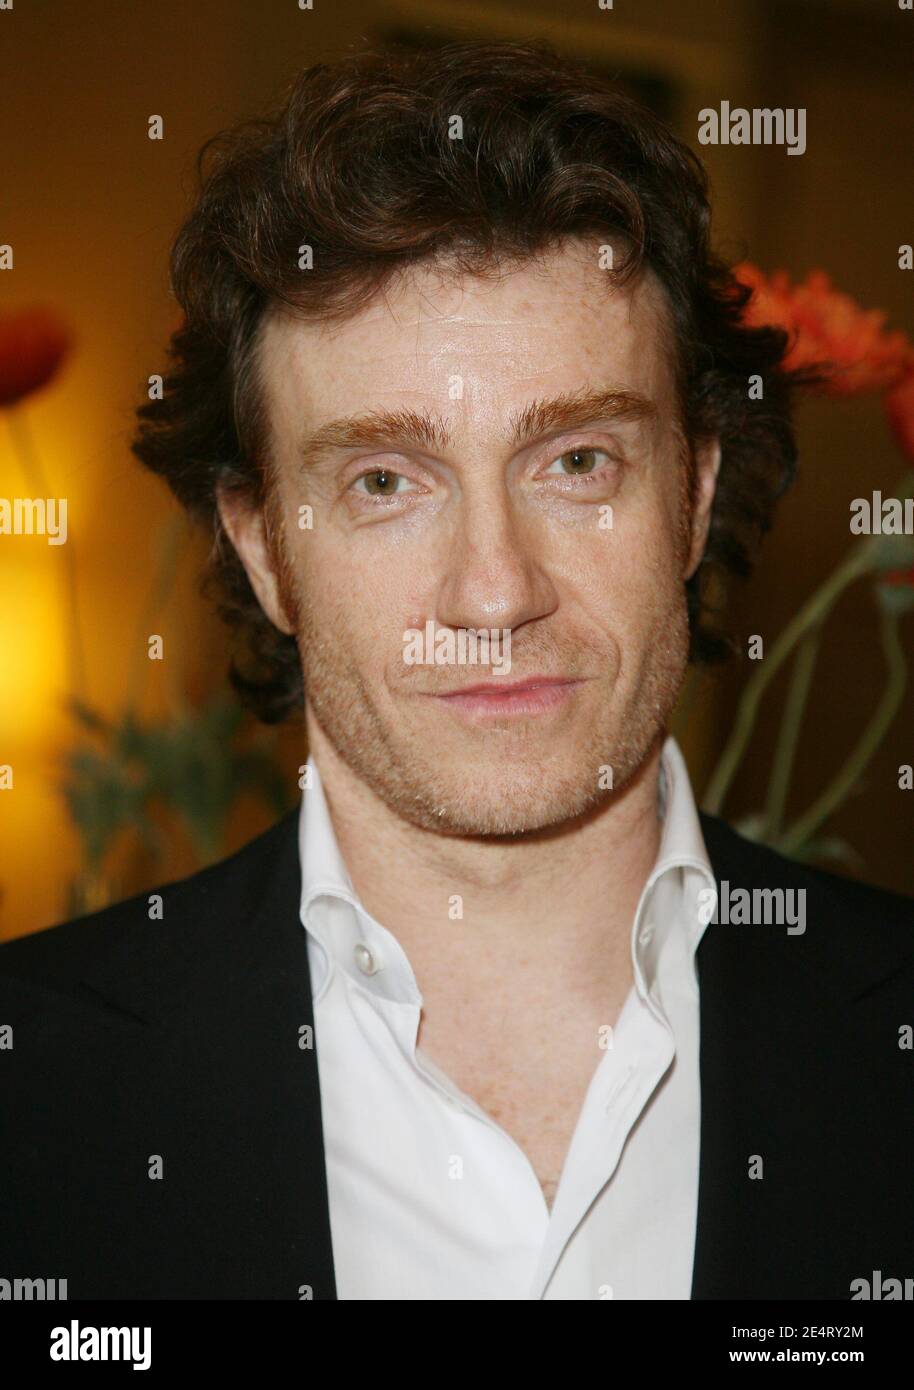 Actor Thierry Fremont poses at the 19th Valenciennes Film Festival closing ceremony in Valenciennes, France on March 30, 2008. Photo by Denis Guignebourg/ABACAPRESS.COM Stock Photo